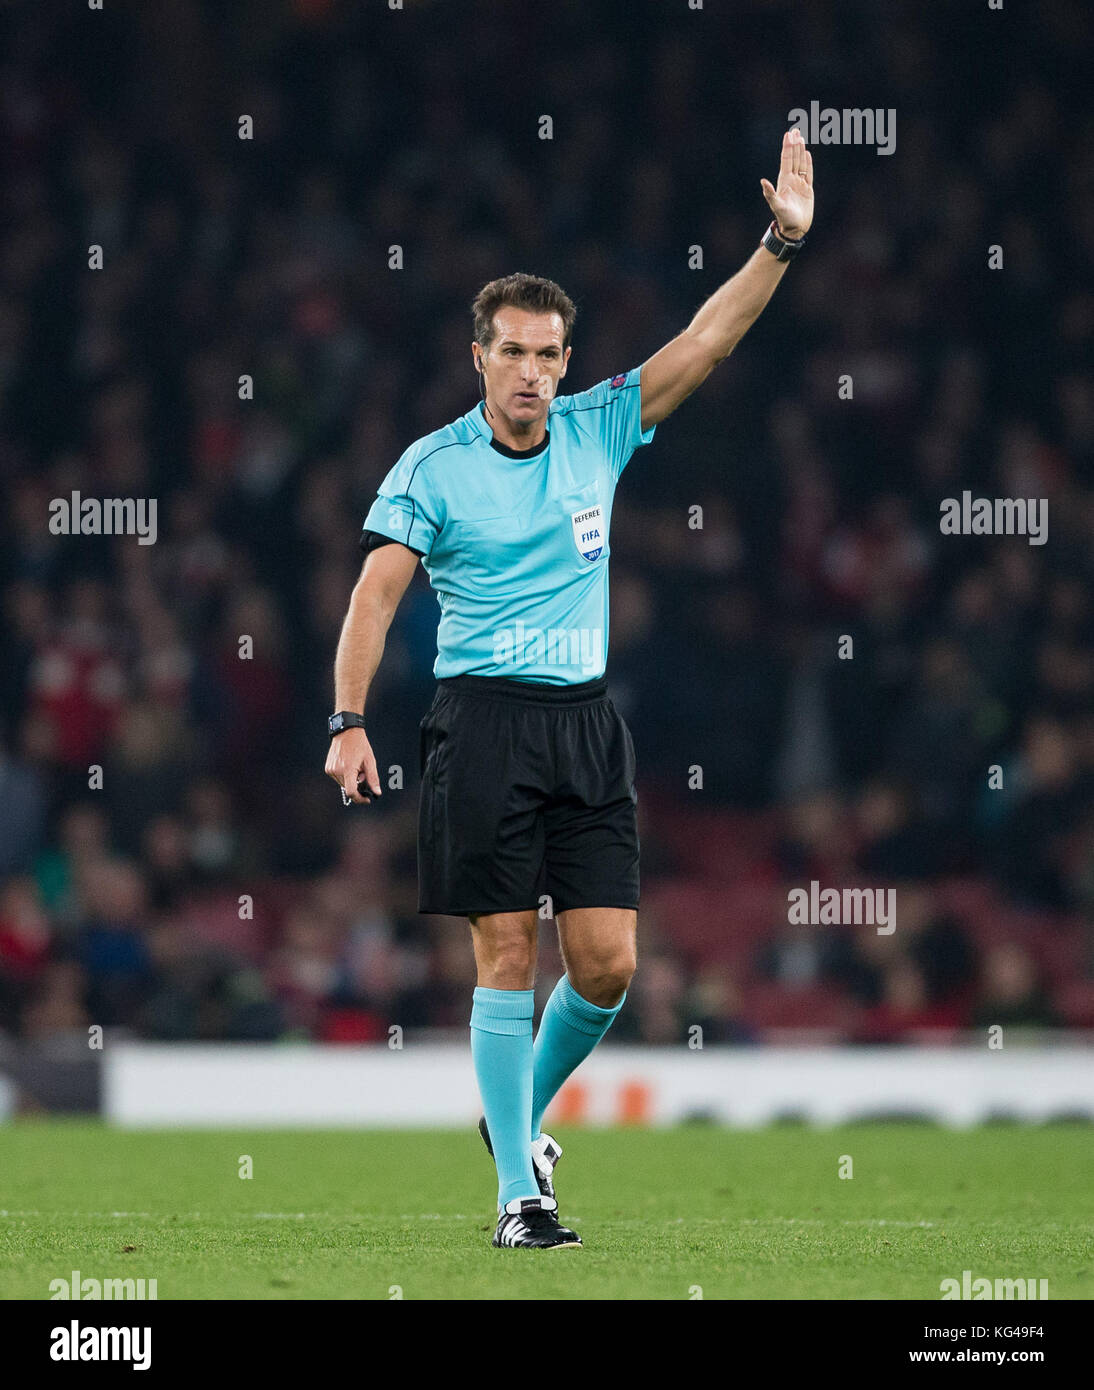 London, UK. 02nd Nov, 2017. Referee Luca Banti during the UEFA Europa League group stage match between Arsenal and FC Red Star Belgrade at the Emirates Stadium, London, England on 2 November 2017. Photo by Andy Rowland. Credit: Andrew Rowland/Alamy Live News Stock Photo